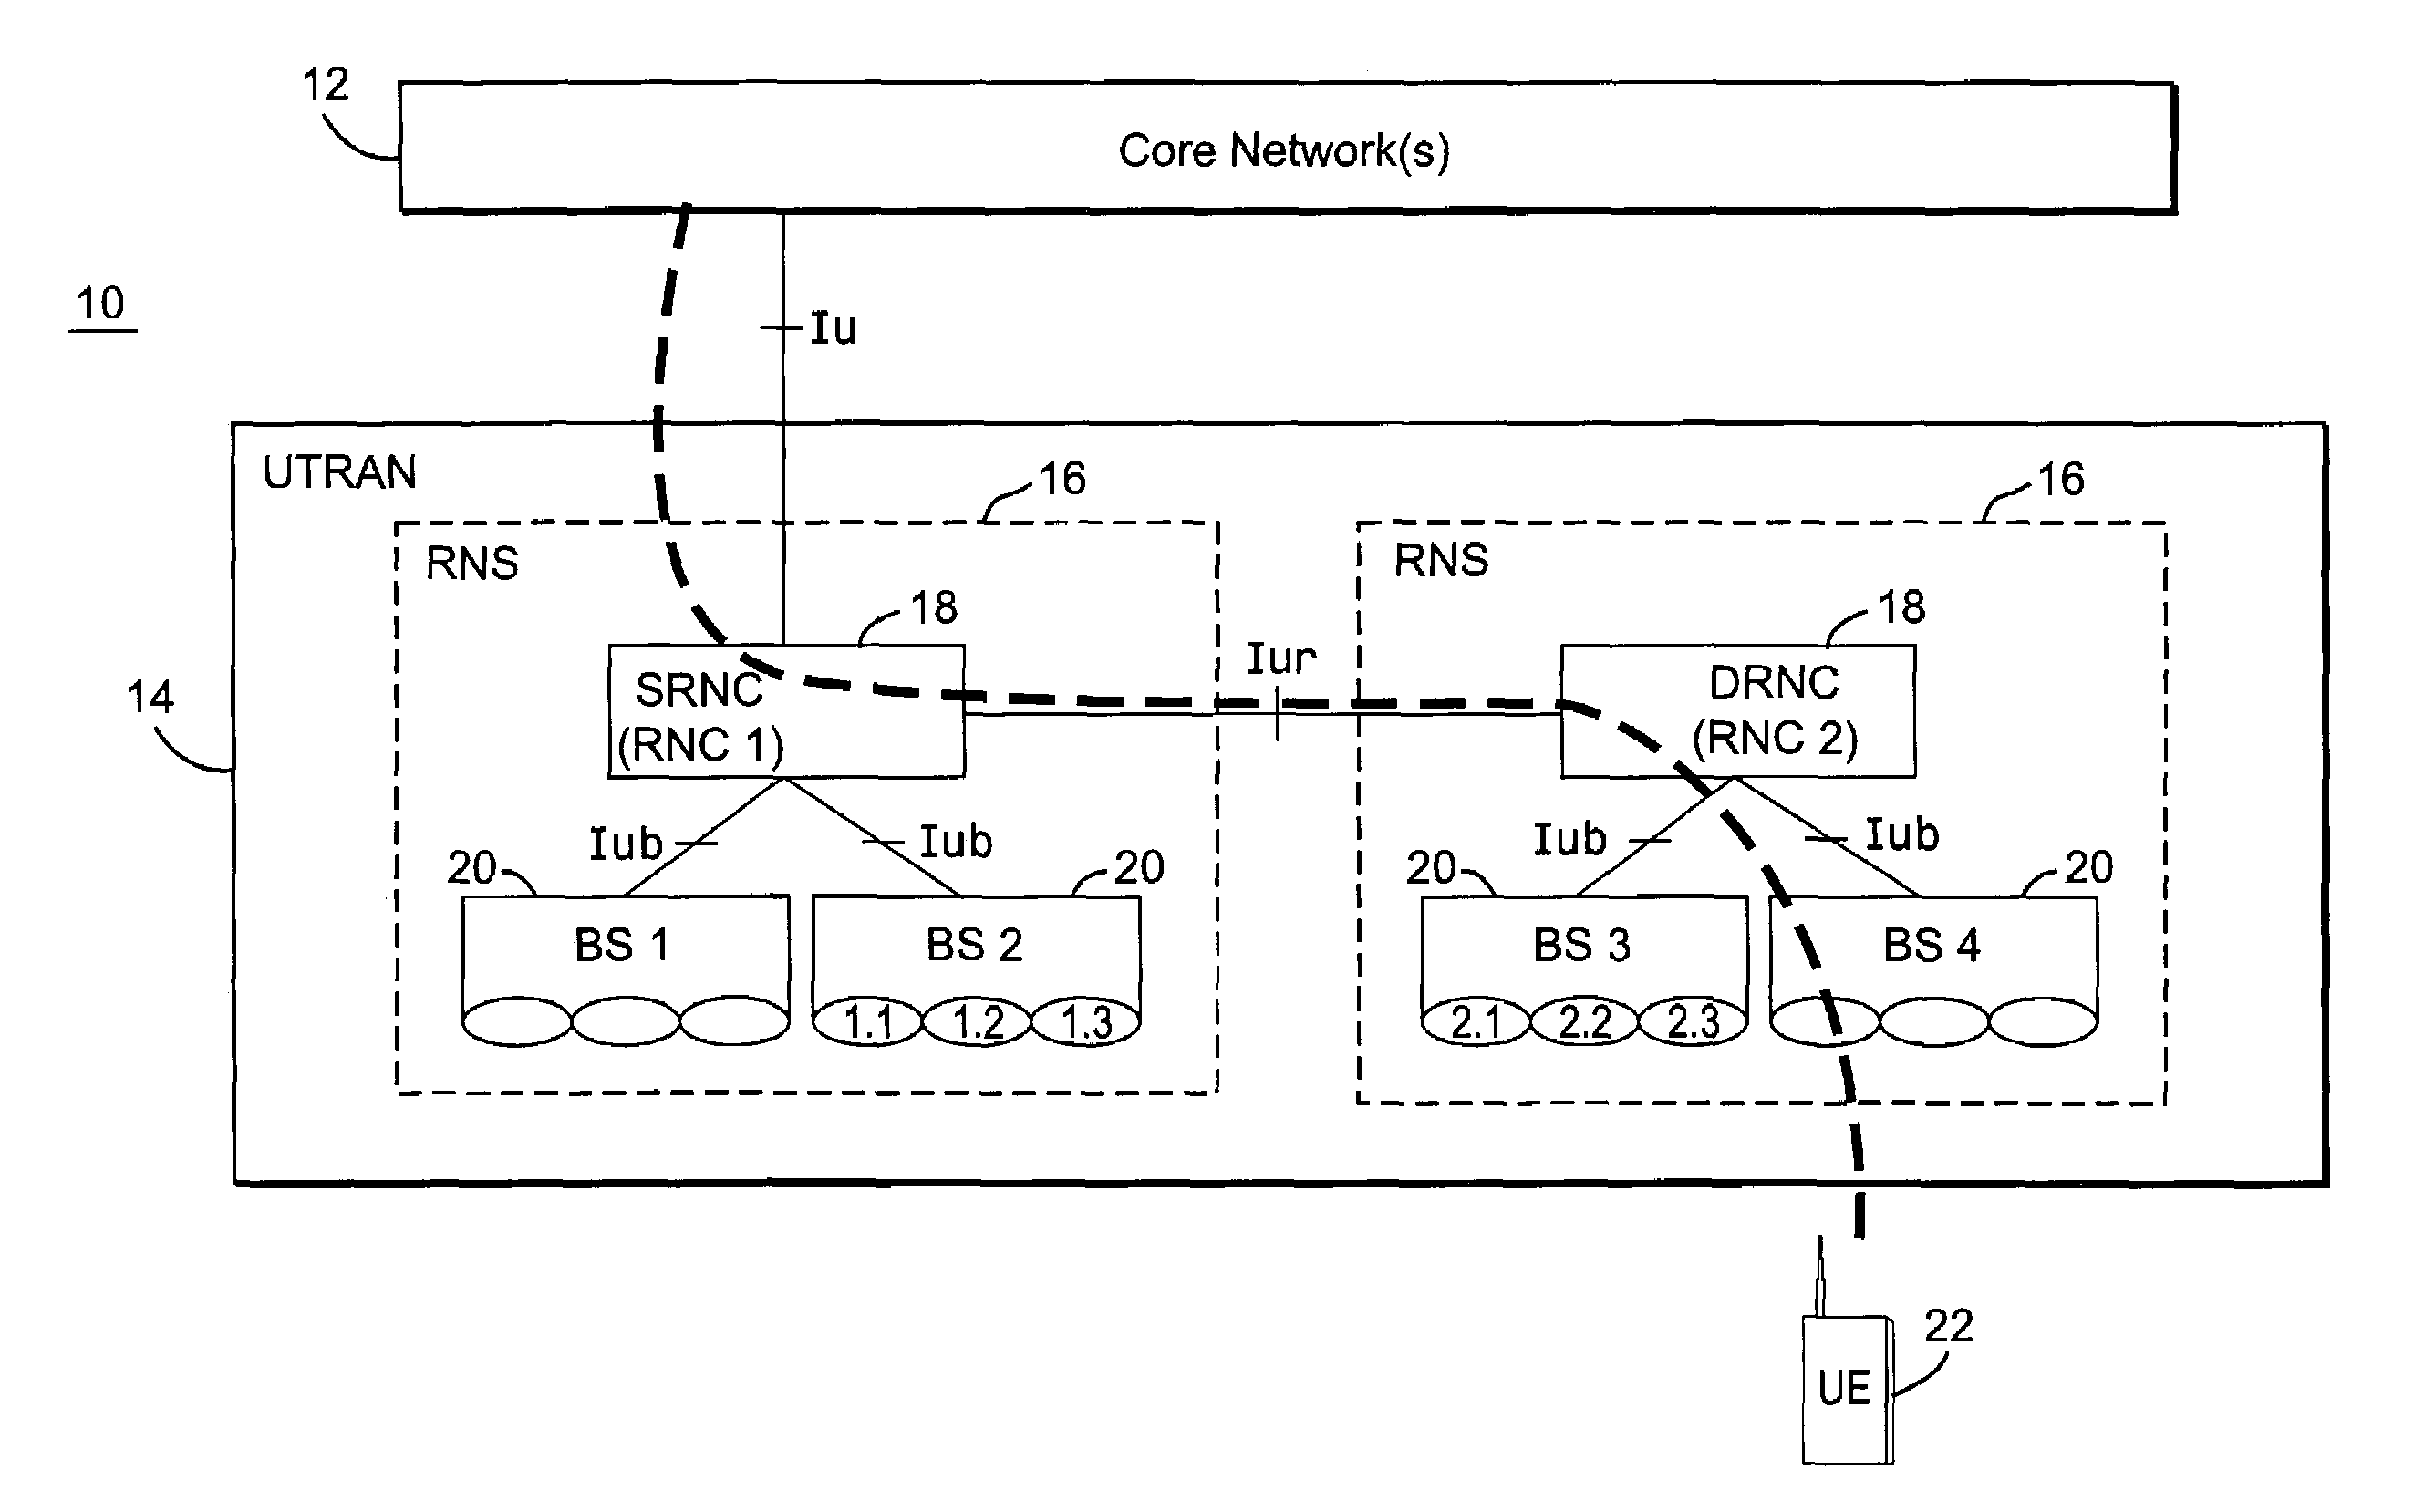 Uplink load determination and signaling for admission and congestion control